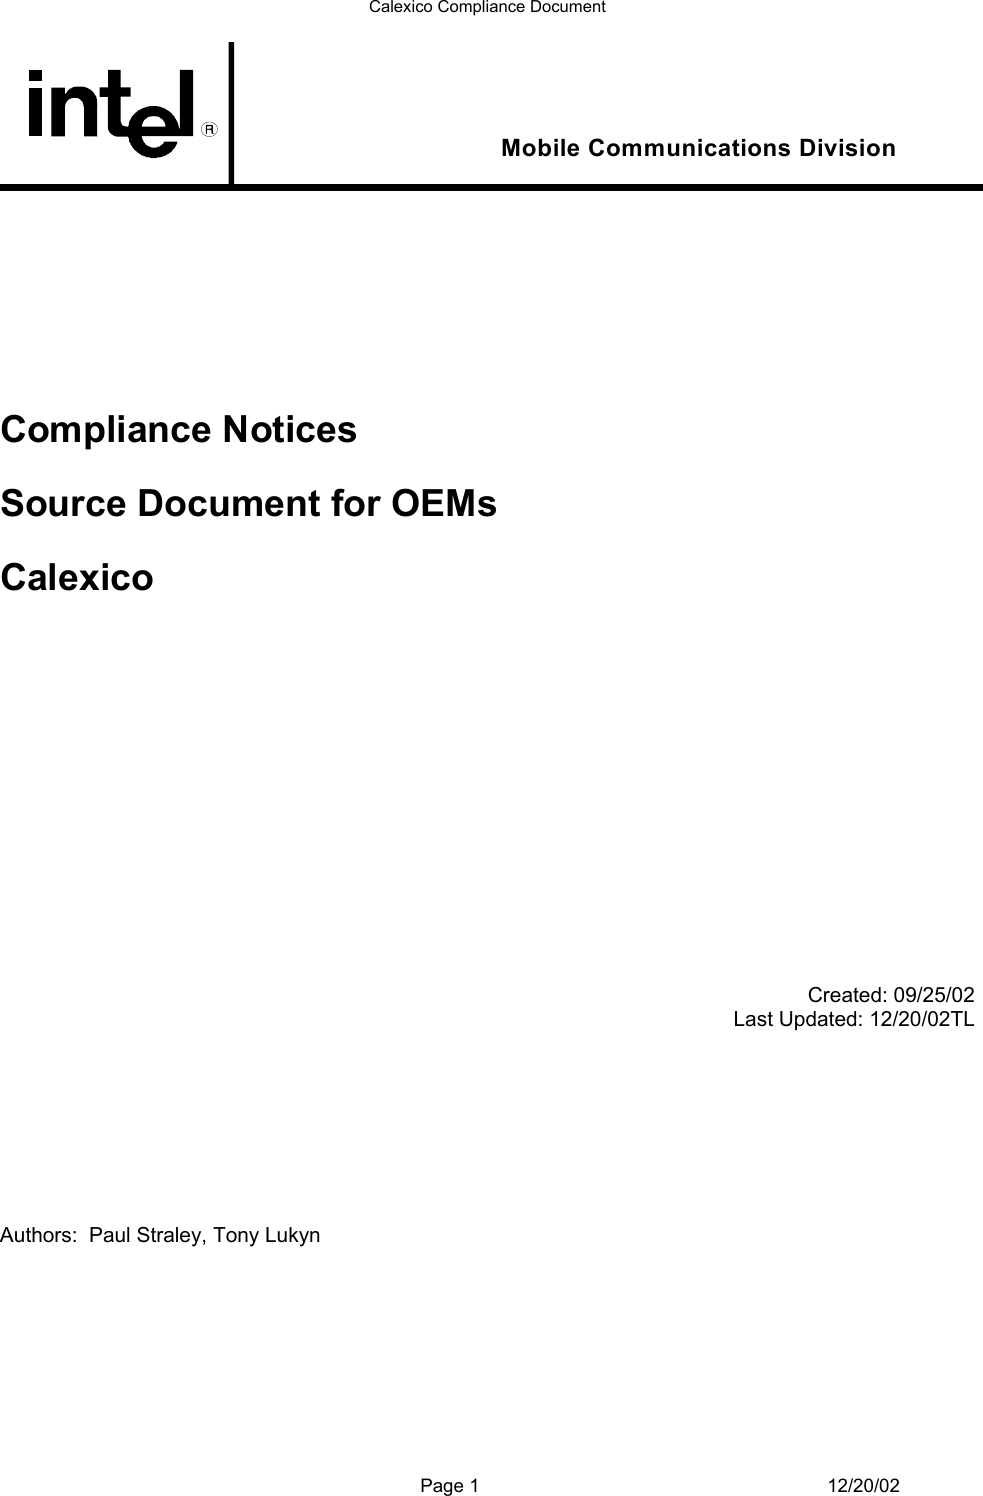 Calexico Compliance Document  Page 1 12/20/02  Mobile Communications Division         Compliance Notices Source Document for OEMs Calexico               Created: 09/25/02 Last Updated: 12/20/02TL         Authors:  Paul Straley, Tony Lukyn   